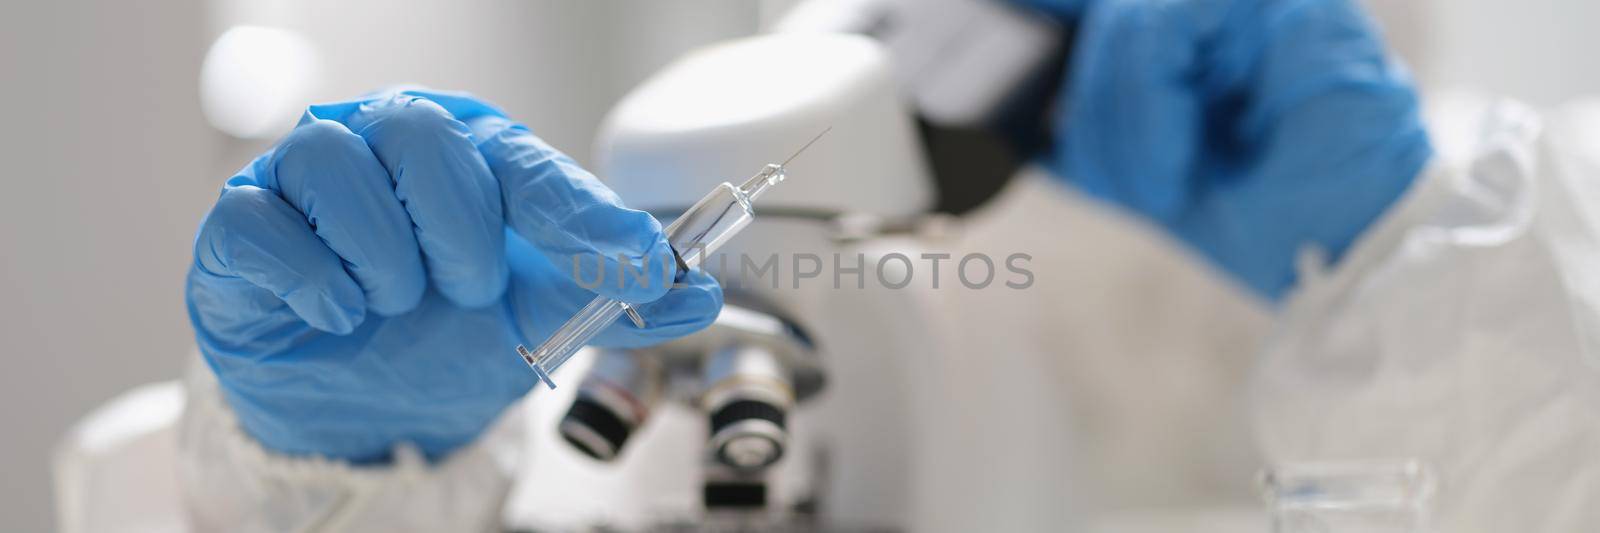 A man holds a syringe with a liquid and looks through a microscop by kuprevich